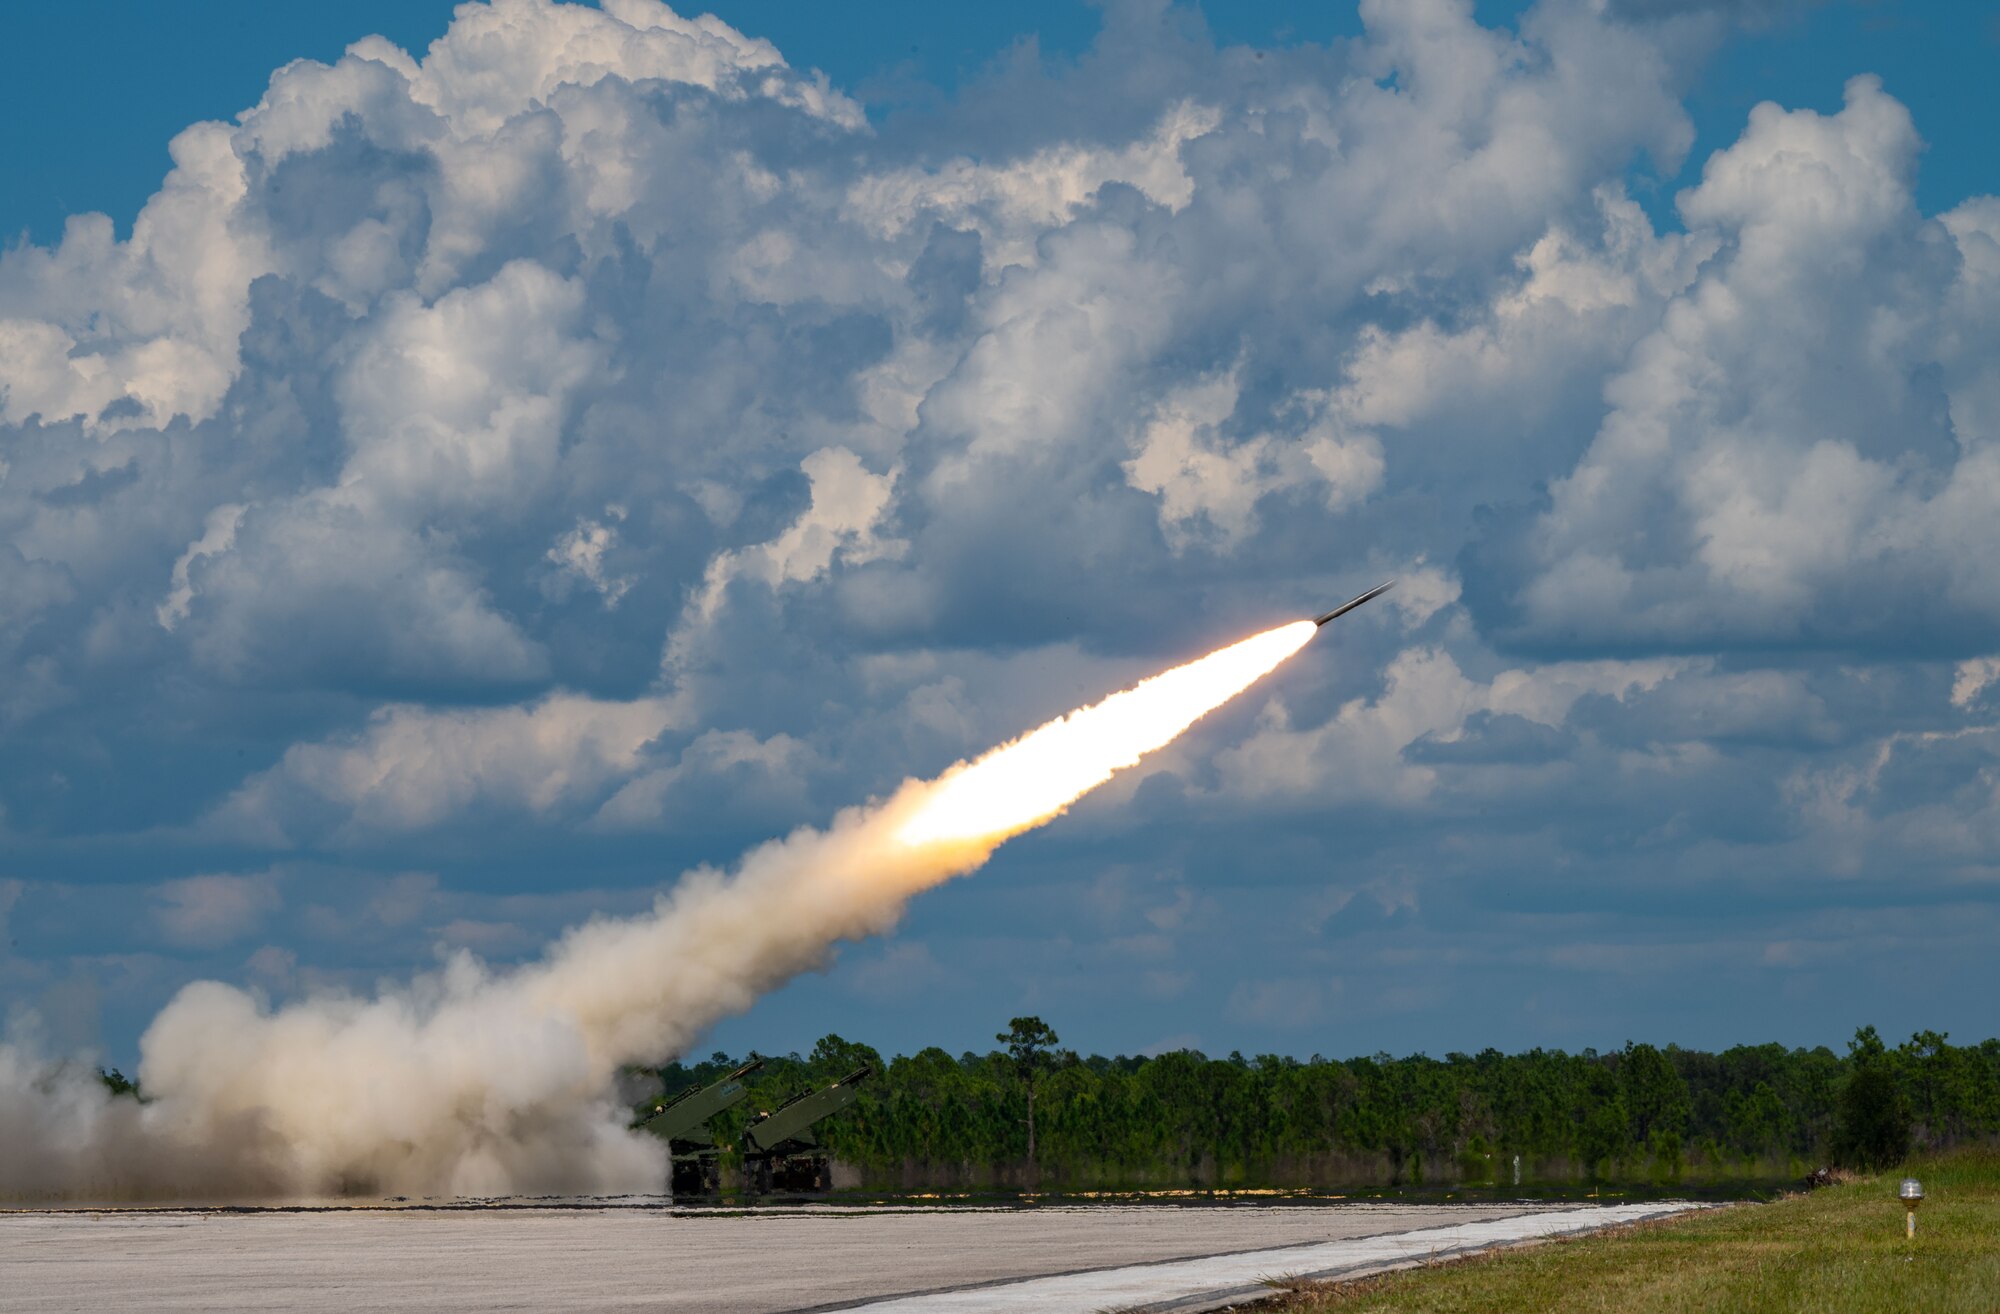 A M142 High Mobility Artillery Rocket System fires rockets during the Agile Royal C-17 Air Force Force Generation certification event at Avon Park Air Force Range, Florida, Sept. 14, 2023. The 3rd Airlift Squadron evaluated their ability to successfully execute Air Mobility Command capabilities, enhance joint interoperability with other U.S. military branches and conduct operations in a high threat environment during Agile Royal. (U.S. Air Force photo by Airman 1st Class Amanda Jett)